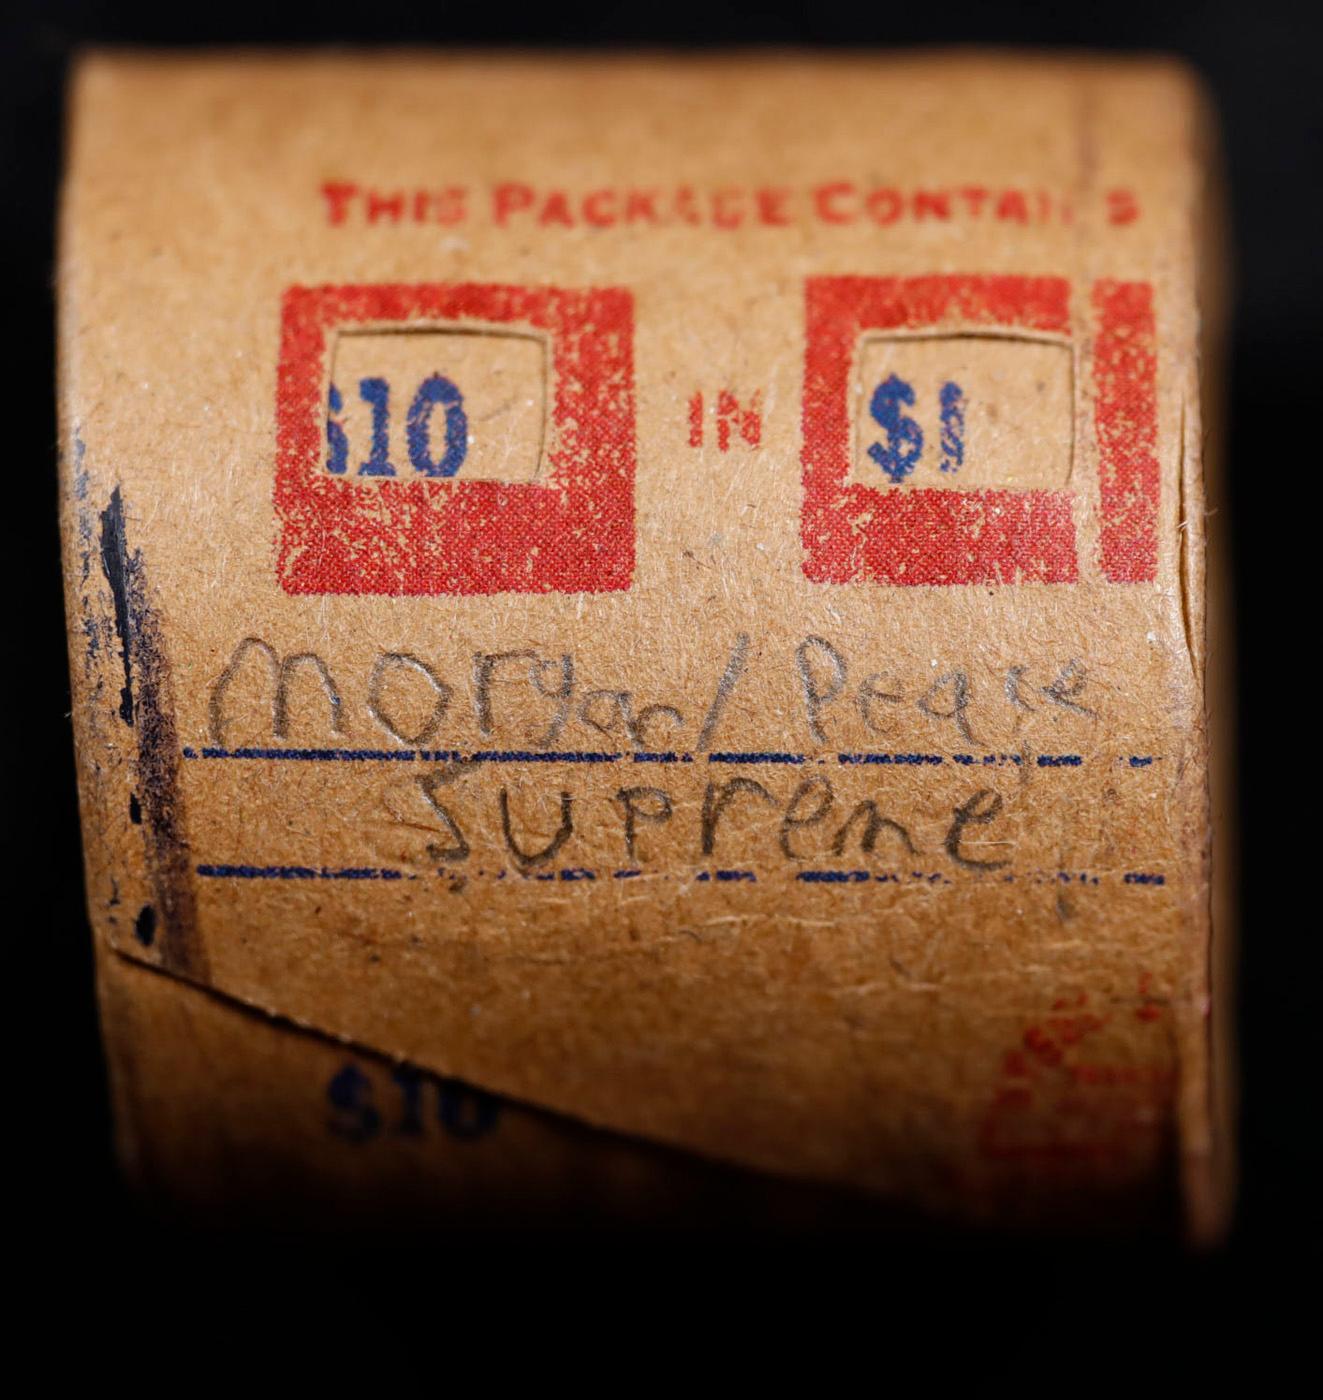 *EXCLUSIVE* x10 Mixed Covered End Roll! Marked "Morgan/Peace Surpeme"! - Huge Vault Hoard  (FC)